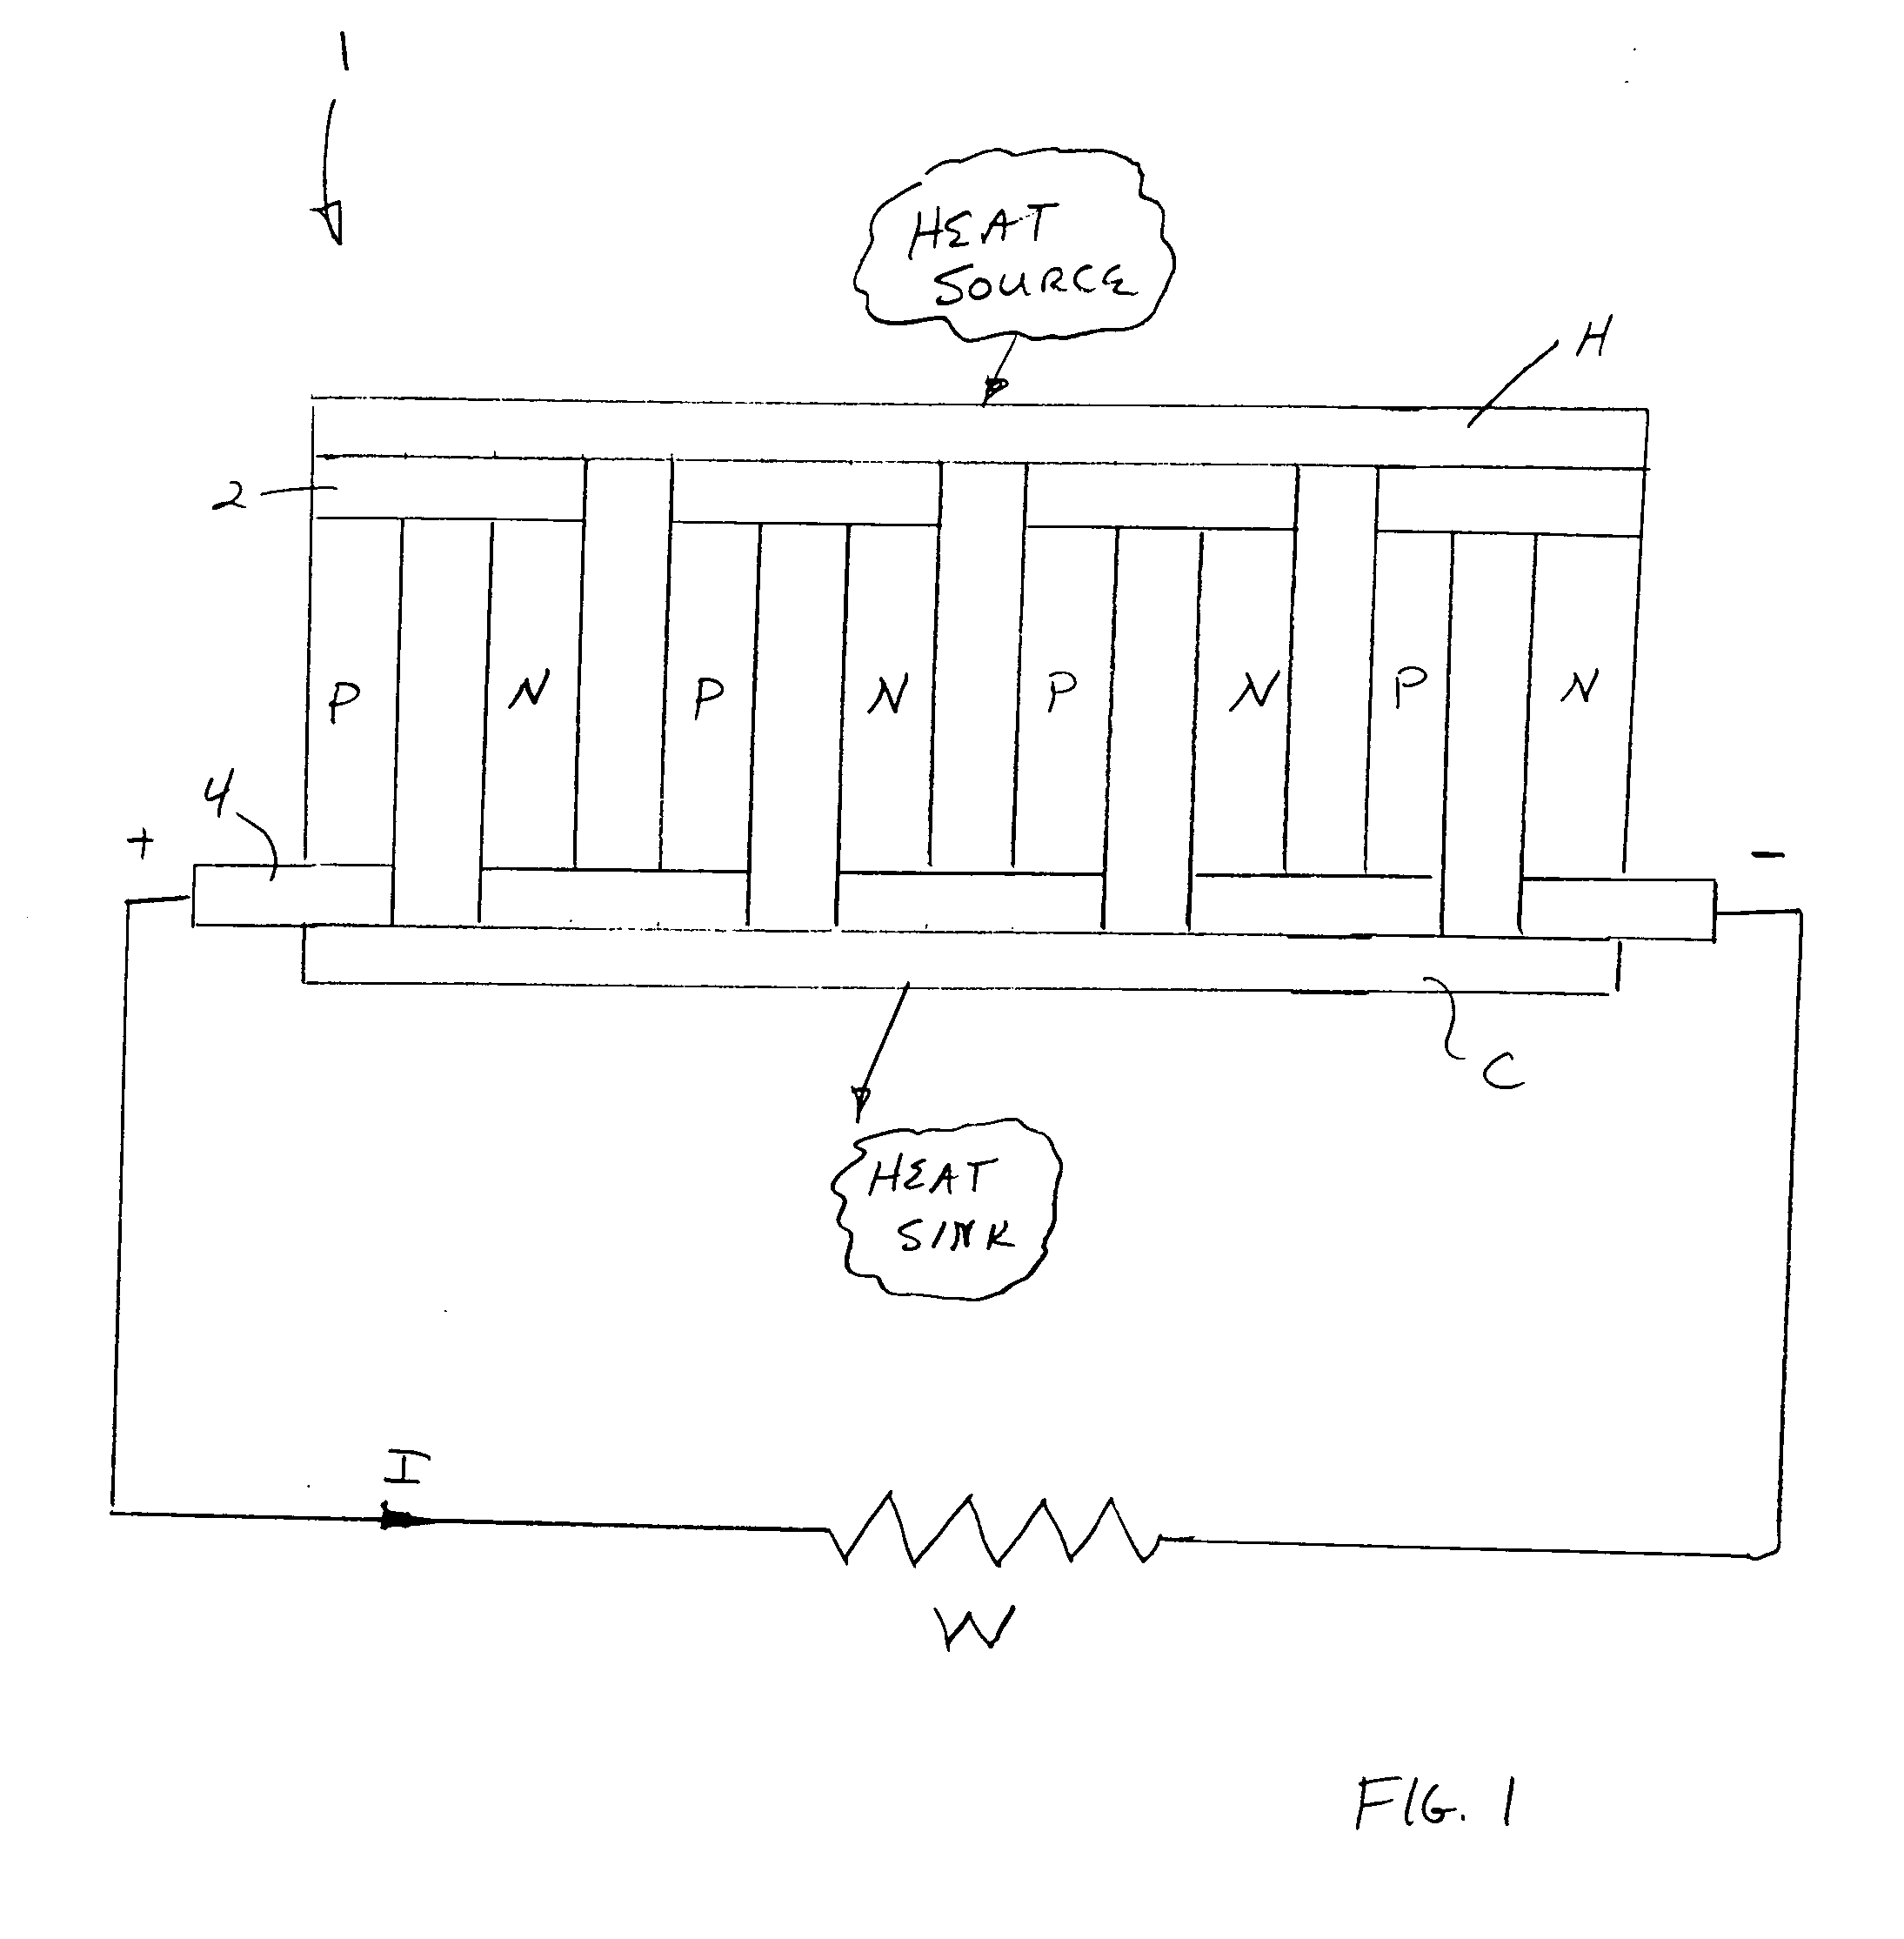 Generation of electricity in a fireplace using thermoelectric module